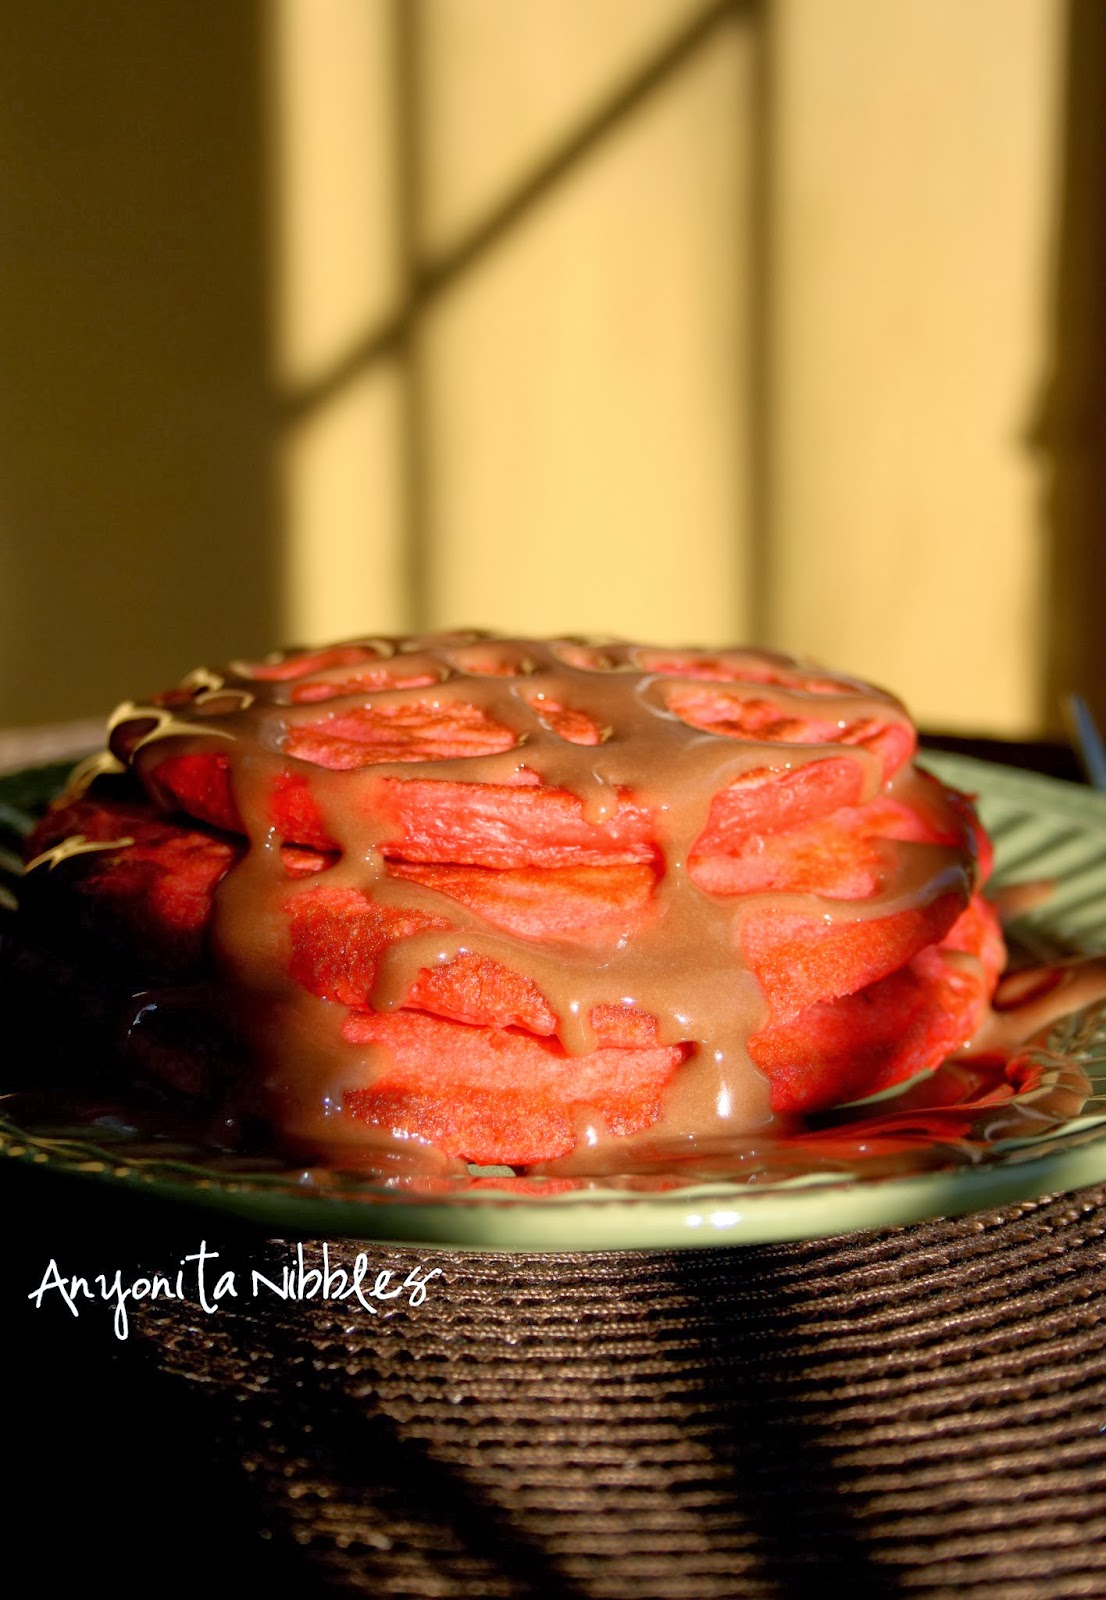 Easy Nutella Cream Cheese Sauce for Red Velvet Pancakes from www.anyonita-nibbles.com